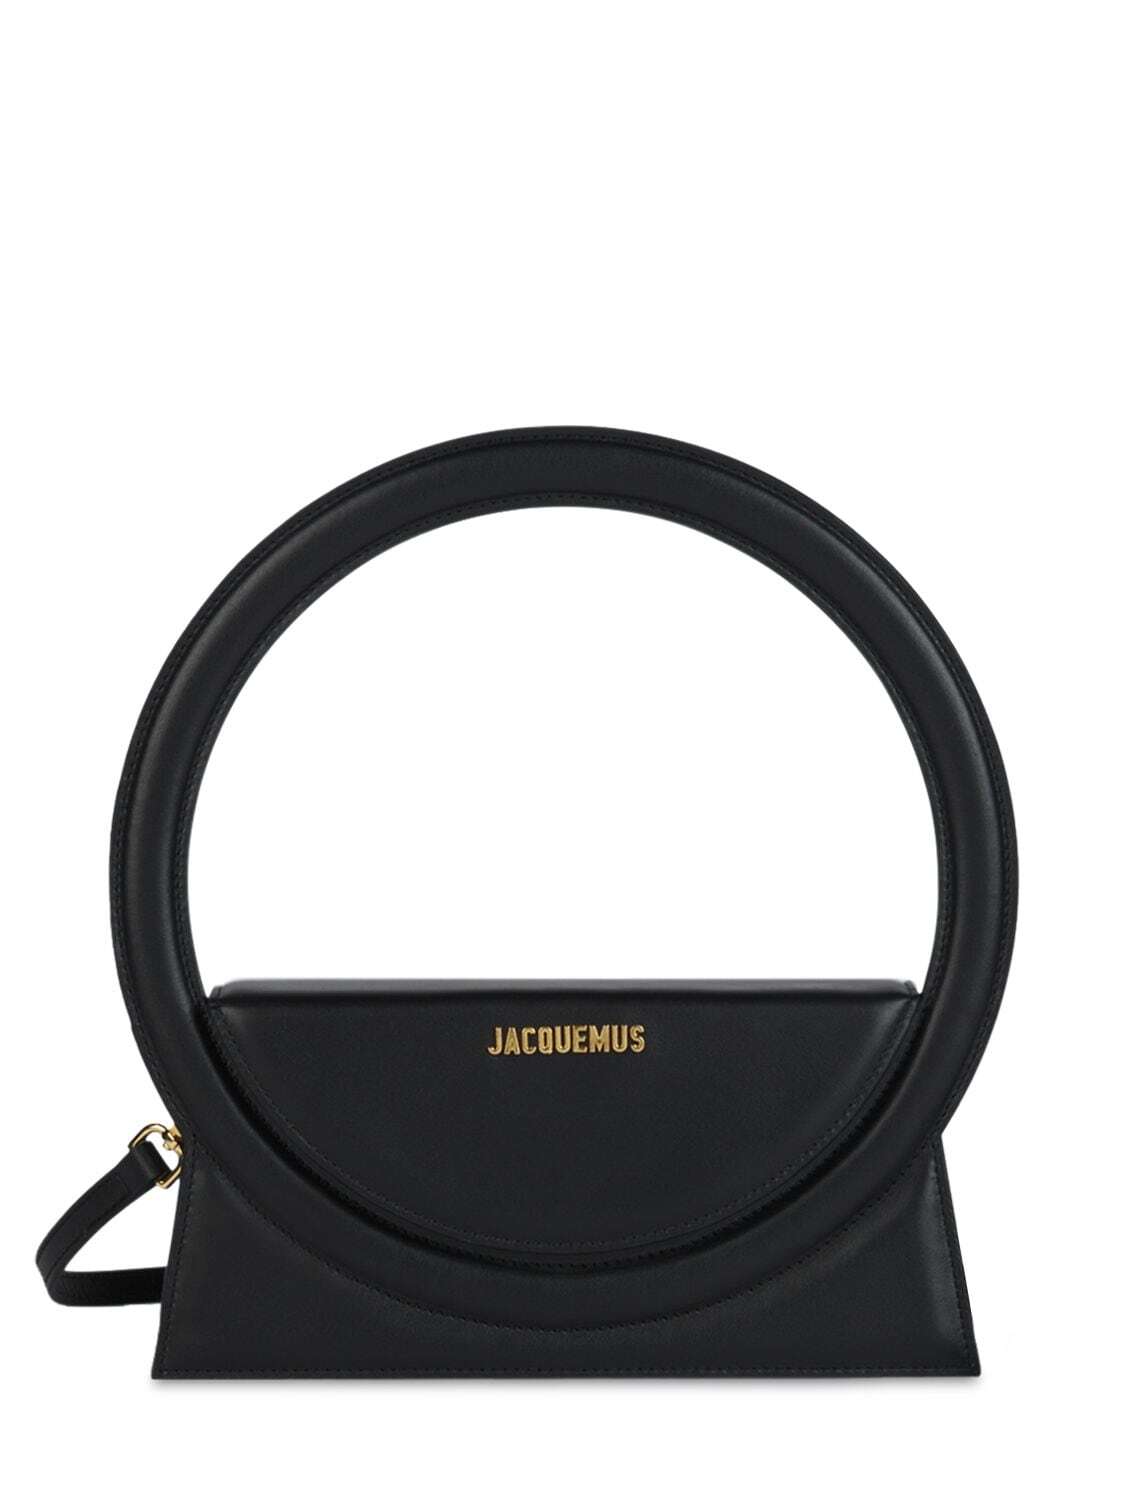 JACQUEMUS Le Sac Round Leather Top Handle Bag in black